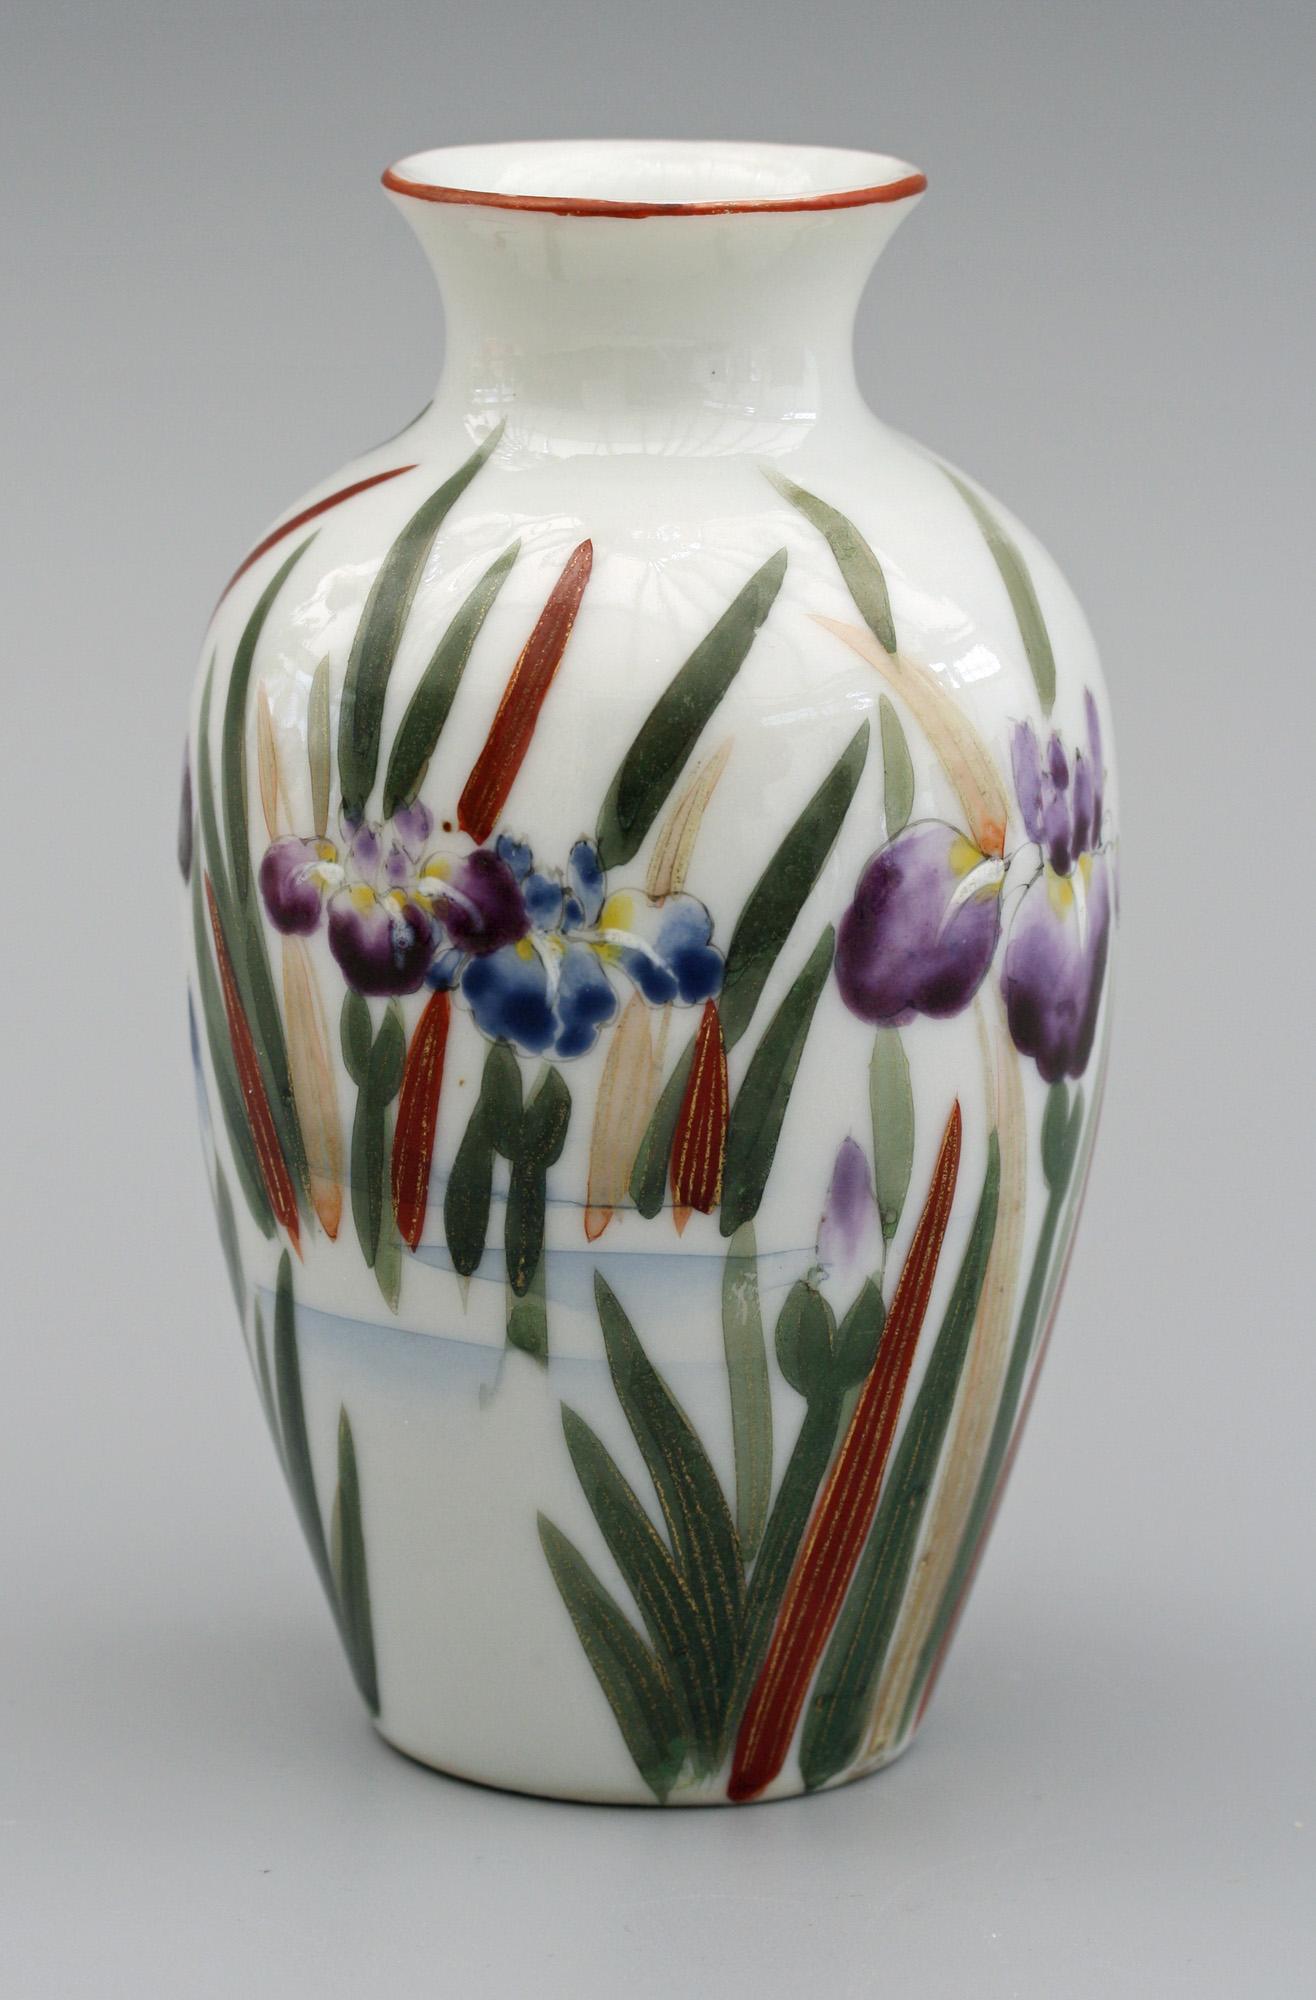 A very fine vintage Japanese porcelain vase, probably Arita Fukagawa, hand painted with a bird amidst flowering iris's dating from the first half of the 20th century. The small bulbous shaped vase has a narrow and short trumpet shaped top and is